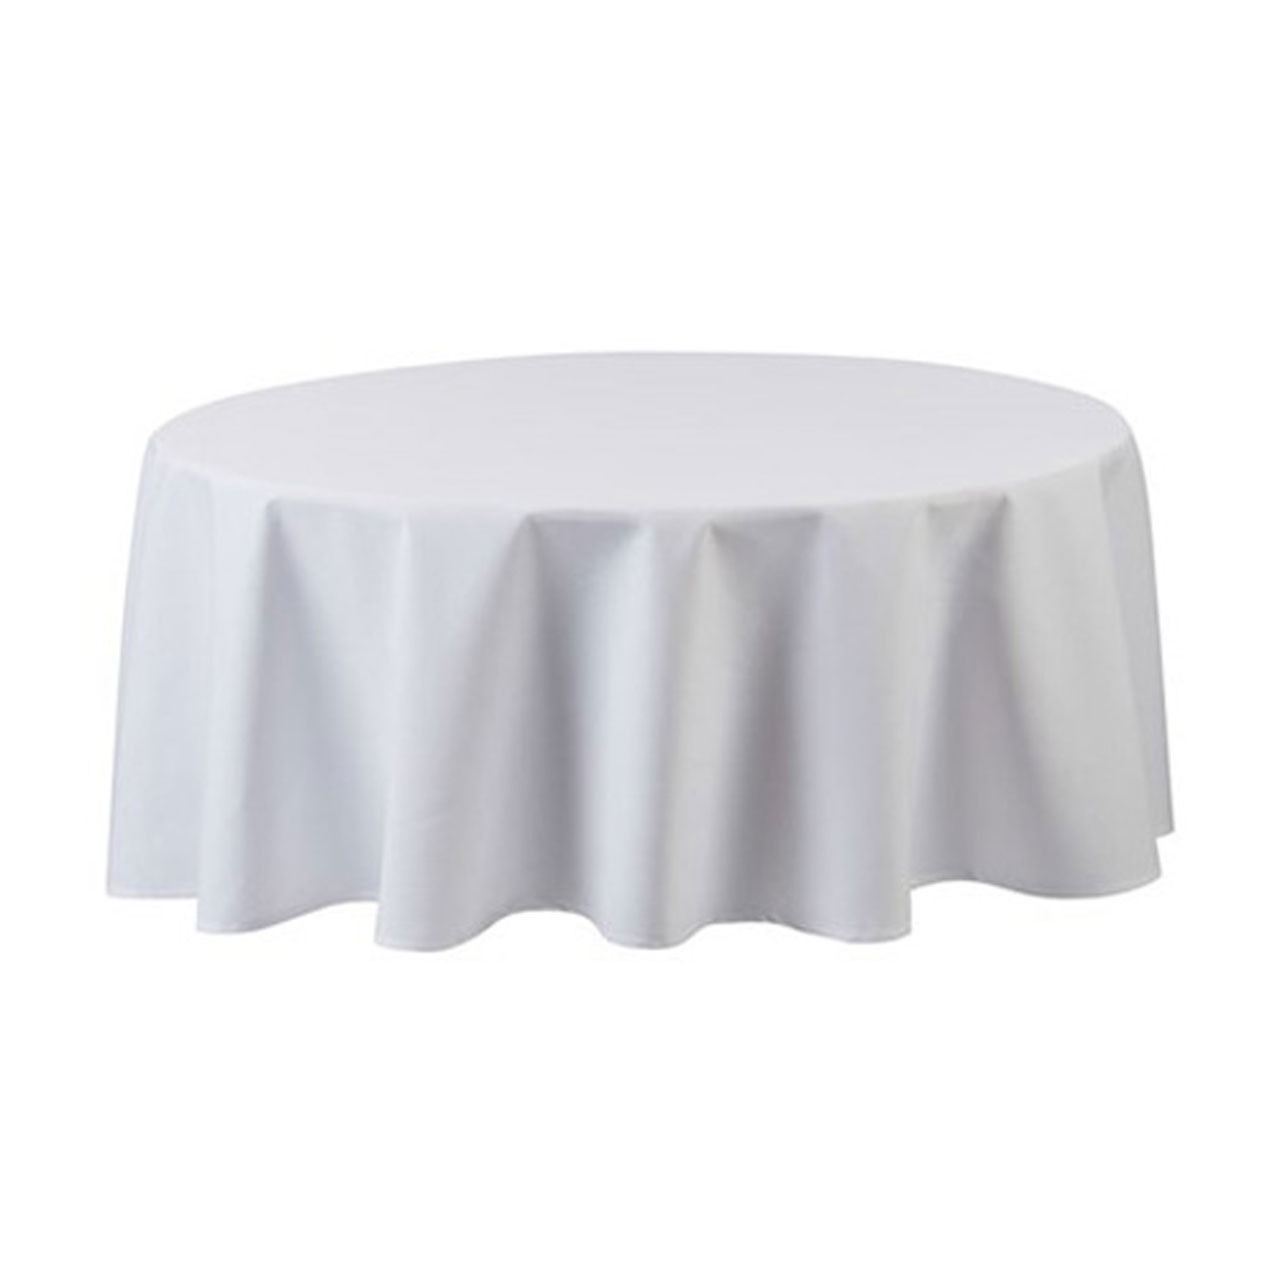 What are key details to note about the 90 round tablecloth samples?